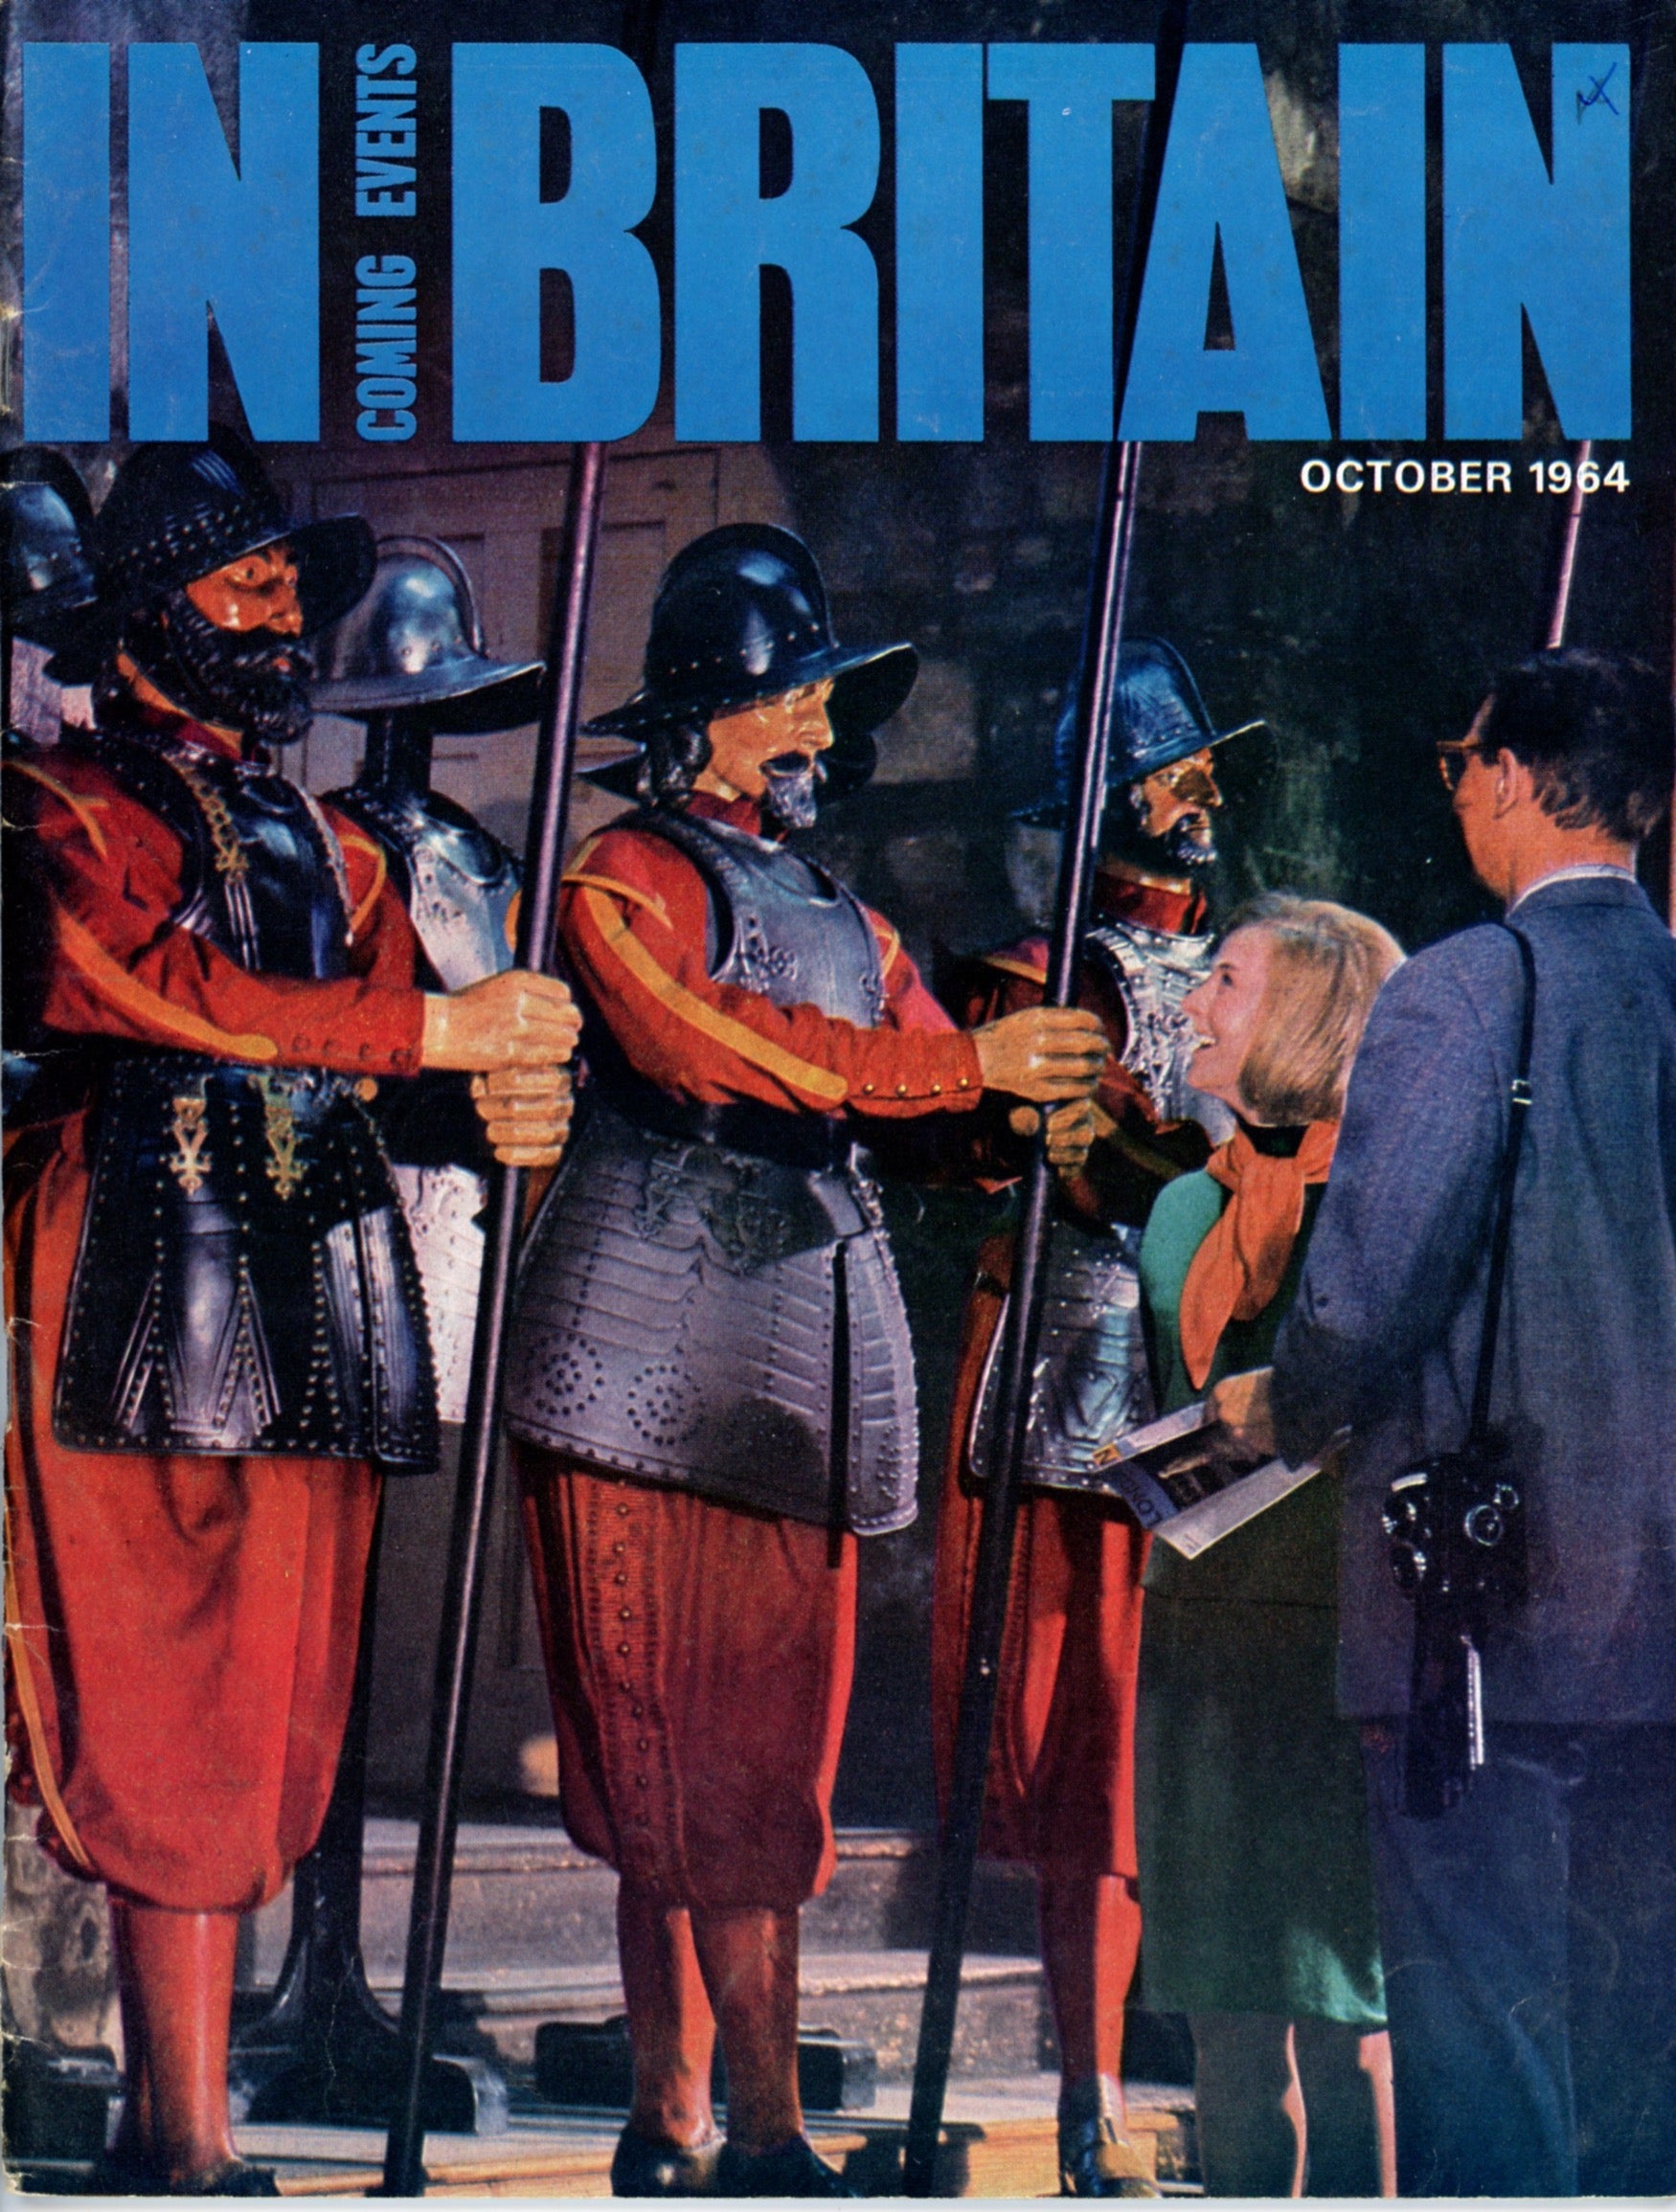 COMING EVENTS IN BRITAIN Vintage Travel Magazines Single Issues © October 1964